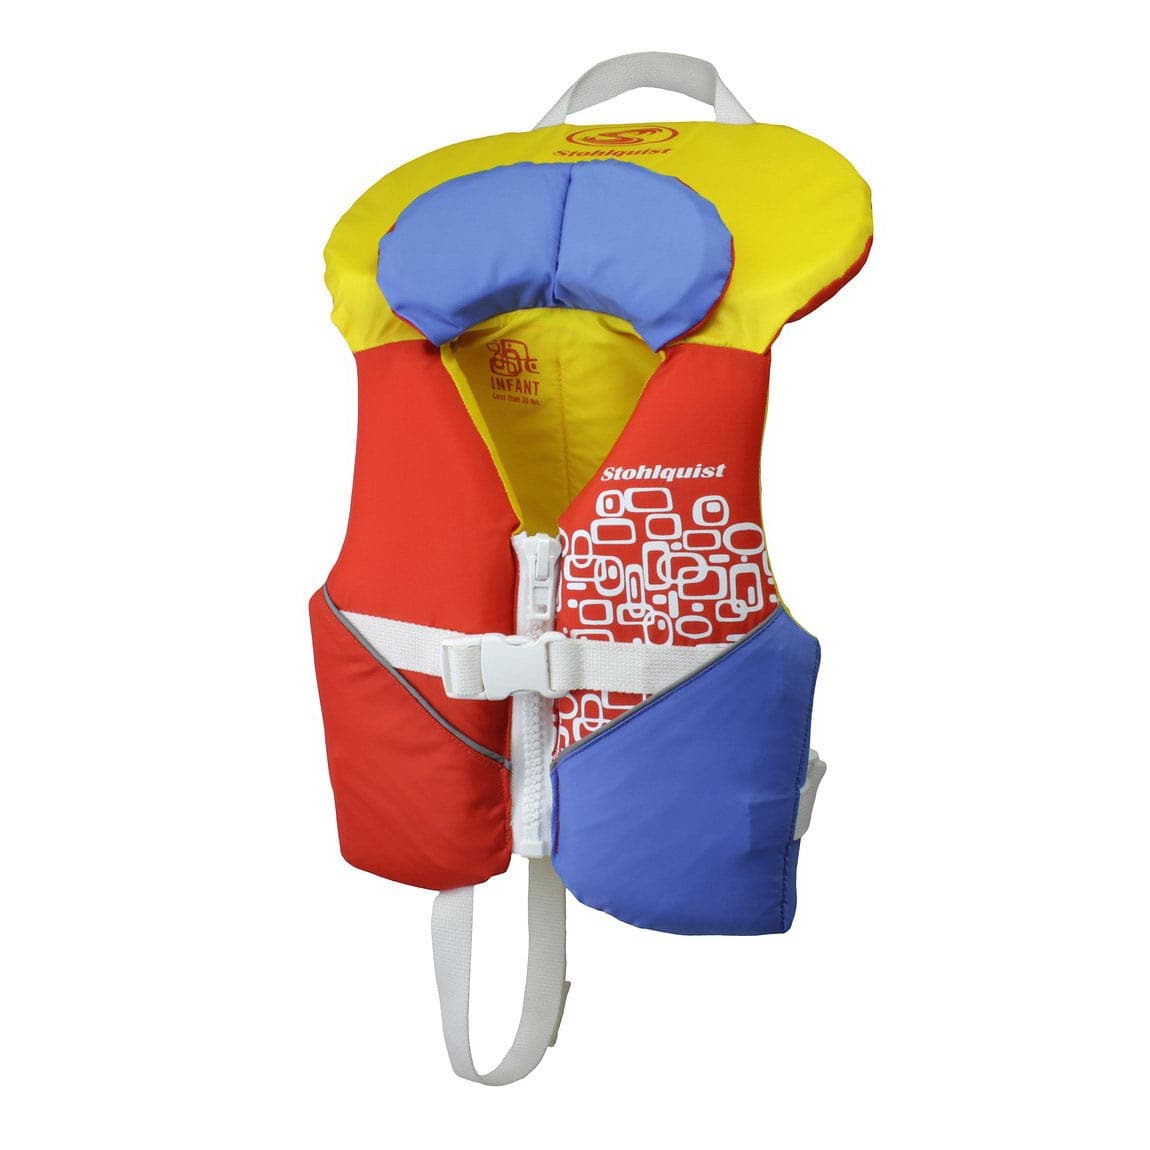 Featuring the Infant & Child PFDs kid's pfd manufactured by Stohlquist shown here from an eighth angle.